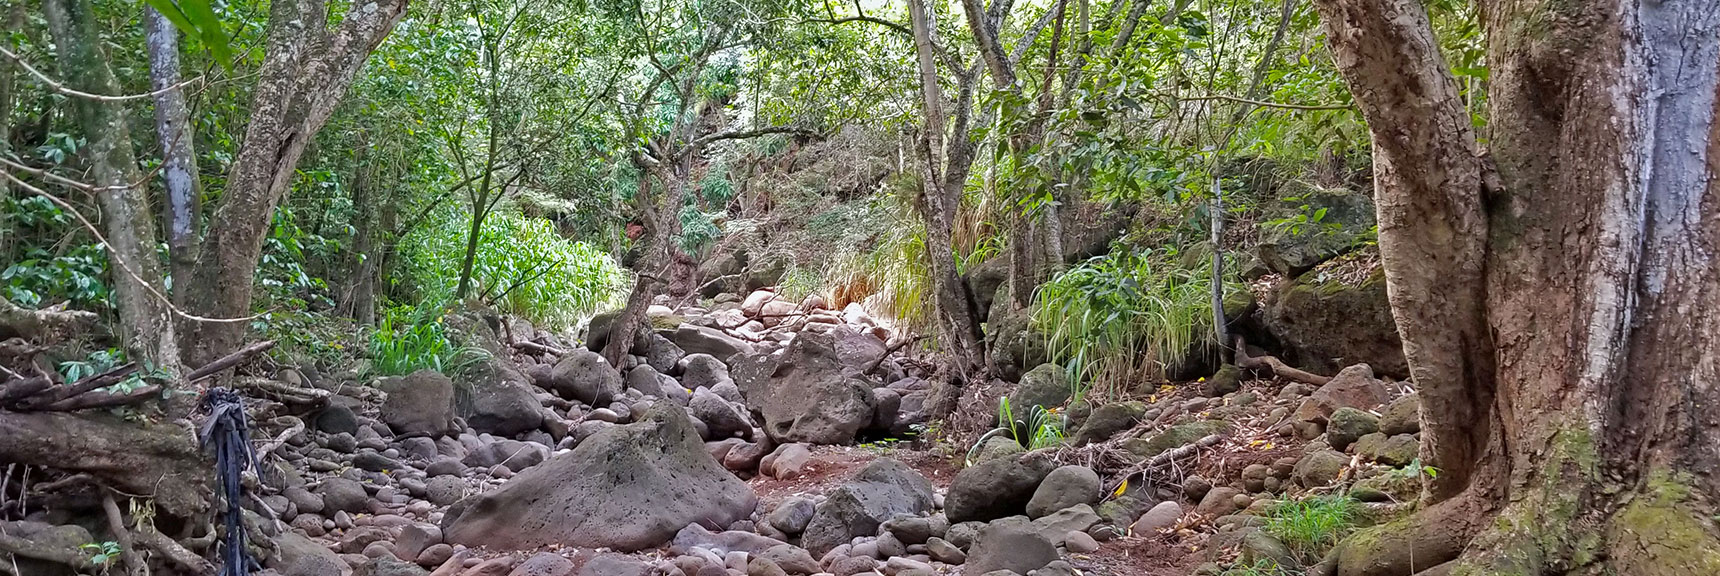 What Would You Discover in Such a Jungle? | Hidden Hills and Jungle Above Kahana in West Maui, Hawaii